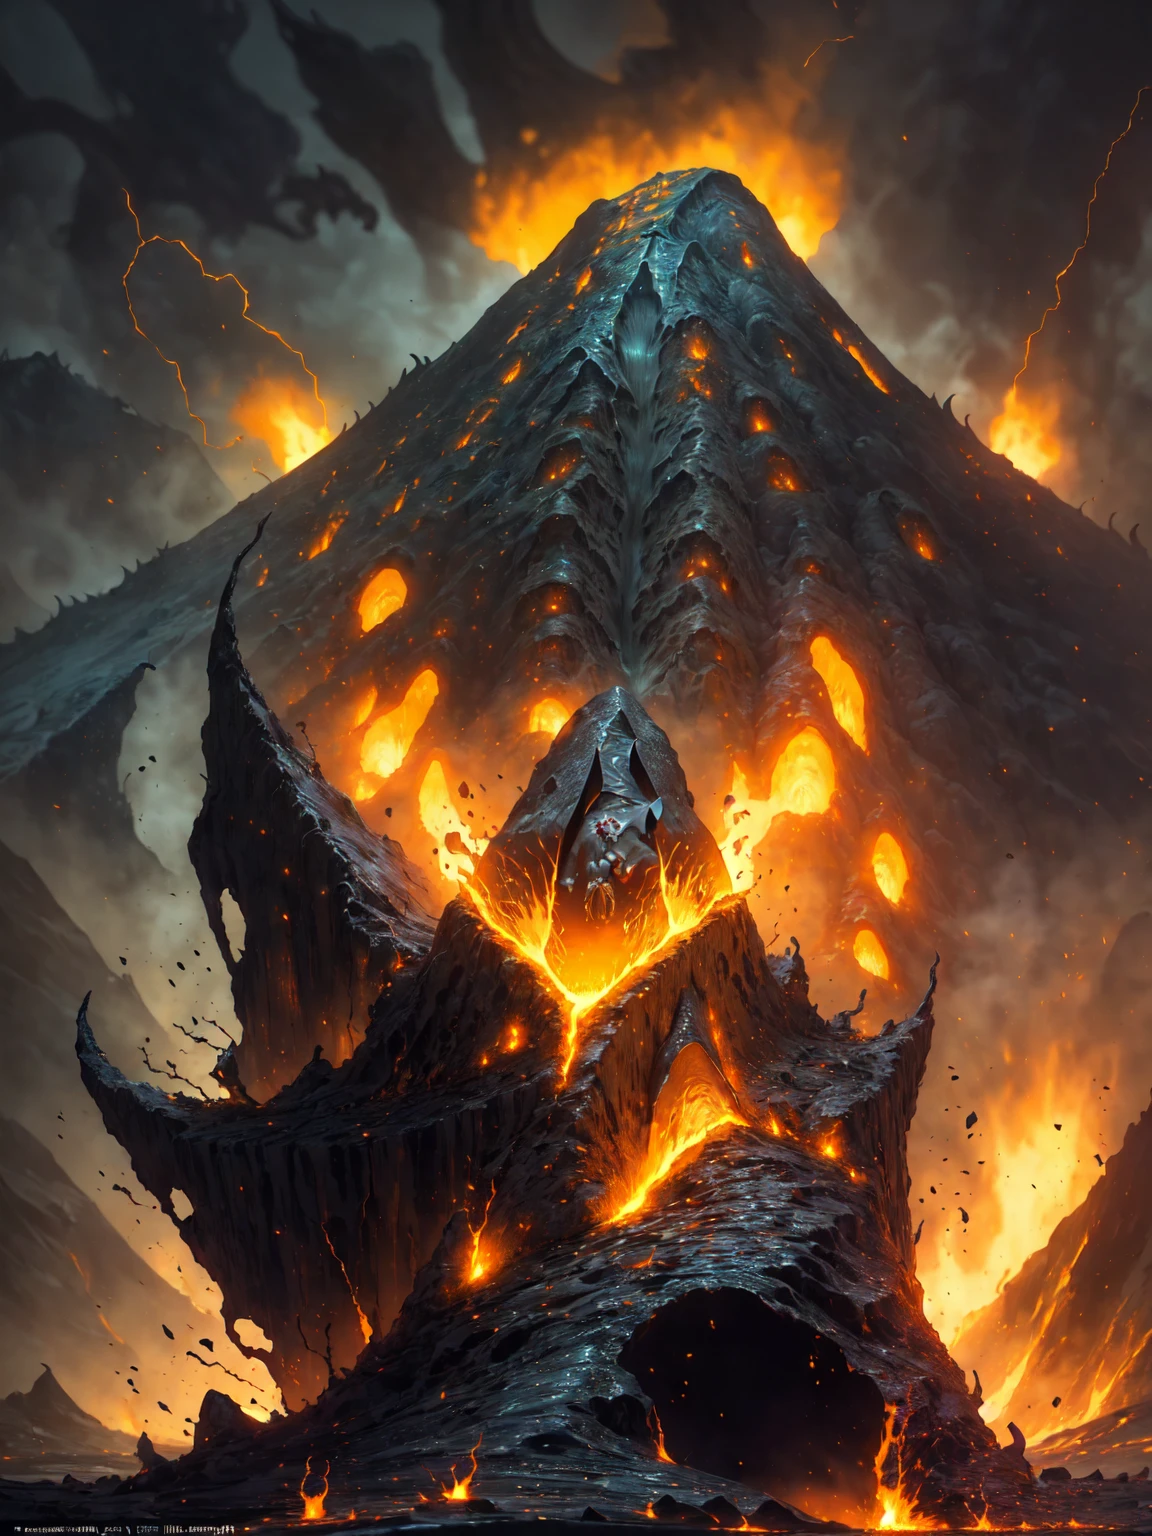 (high quality:1.2),((demonic creature emerging from a volcano:1.5)), an awe-inspiring image, destruction, apocalyptic, HD 4k,8k, masterpiece, ultra-detailed, hyper-realistic, lava melting everything, intense heat, glowing embers, dark and ominous atmosphere, billowing black smoke, molten rocks flying in the air, fiery explosions, crumbling buildings, devastated landscape, surreal and terrifying, vibrant and vivid colors, dramatic lighting, sparks and flames dancing around the creature, the ground cracking and splitting, chaos and despair, a haunting masterpiece in high definition.